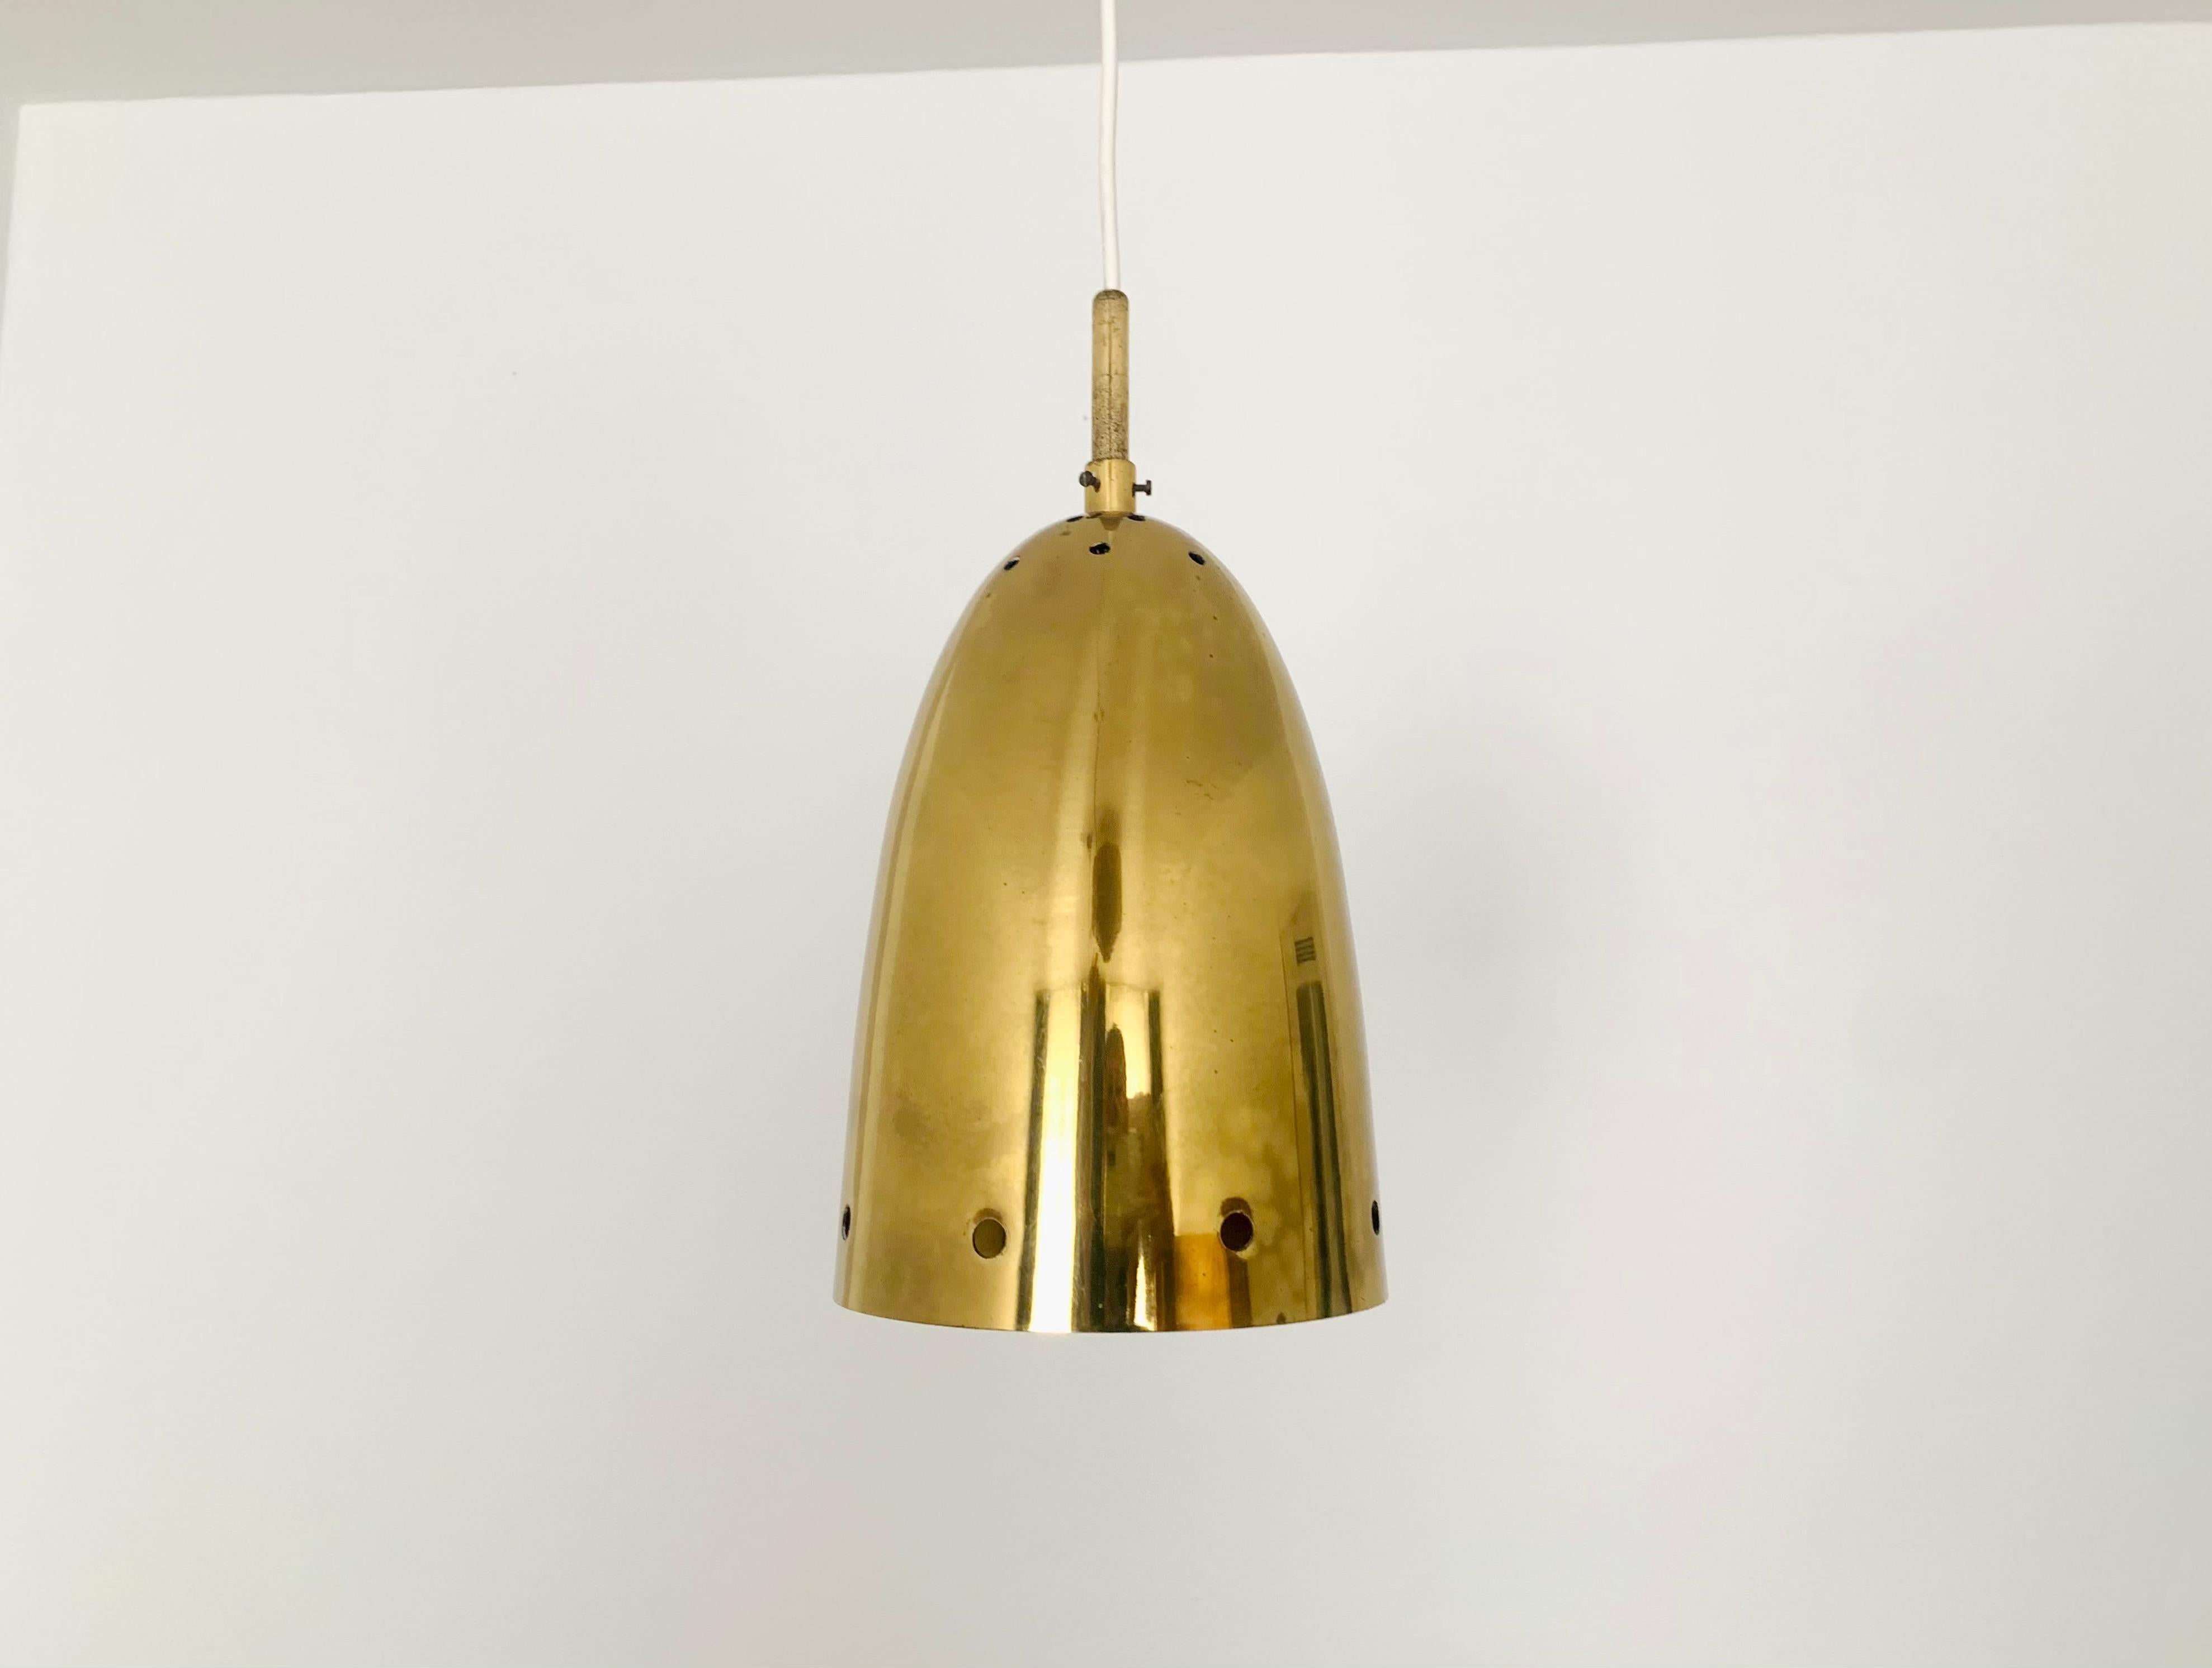 Beautiful gold pendant lamp with decorative holes from the 1950s.
The design and the materials create a fantastic play of light in the room.
Very loving processing and an enrichment for every home.

Condition:

Very good vintage condition with signs